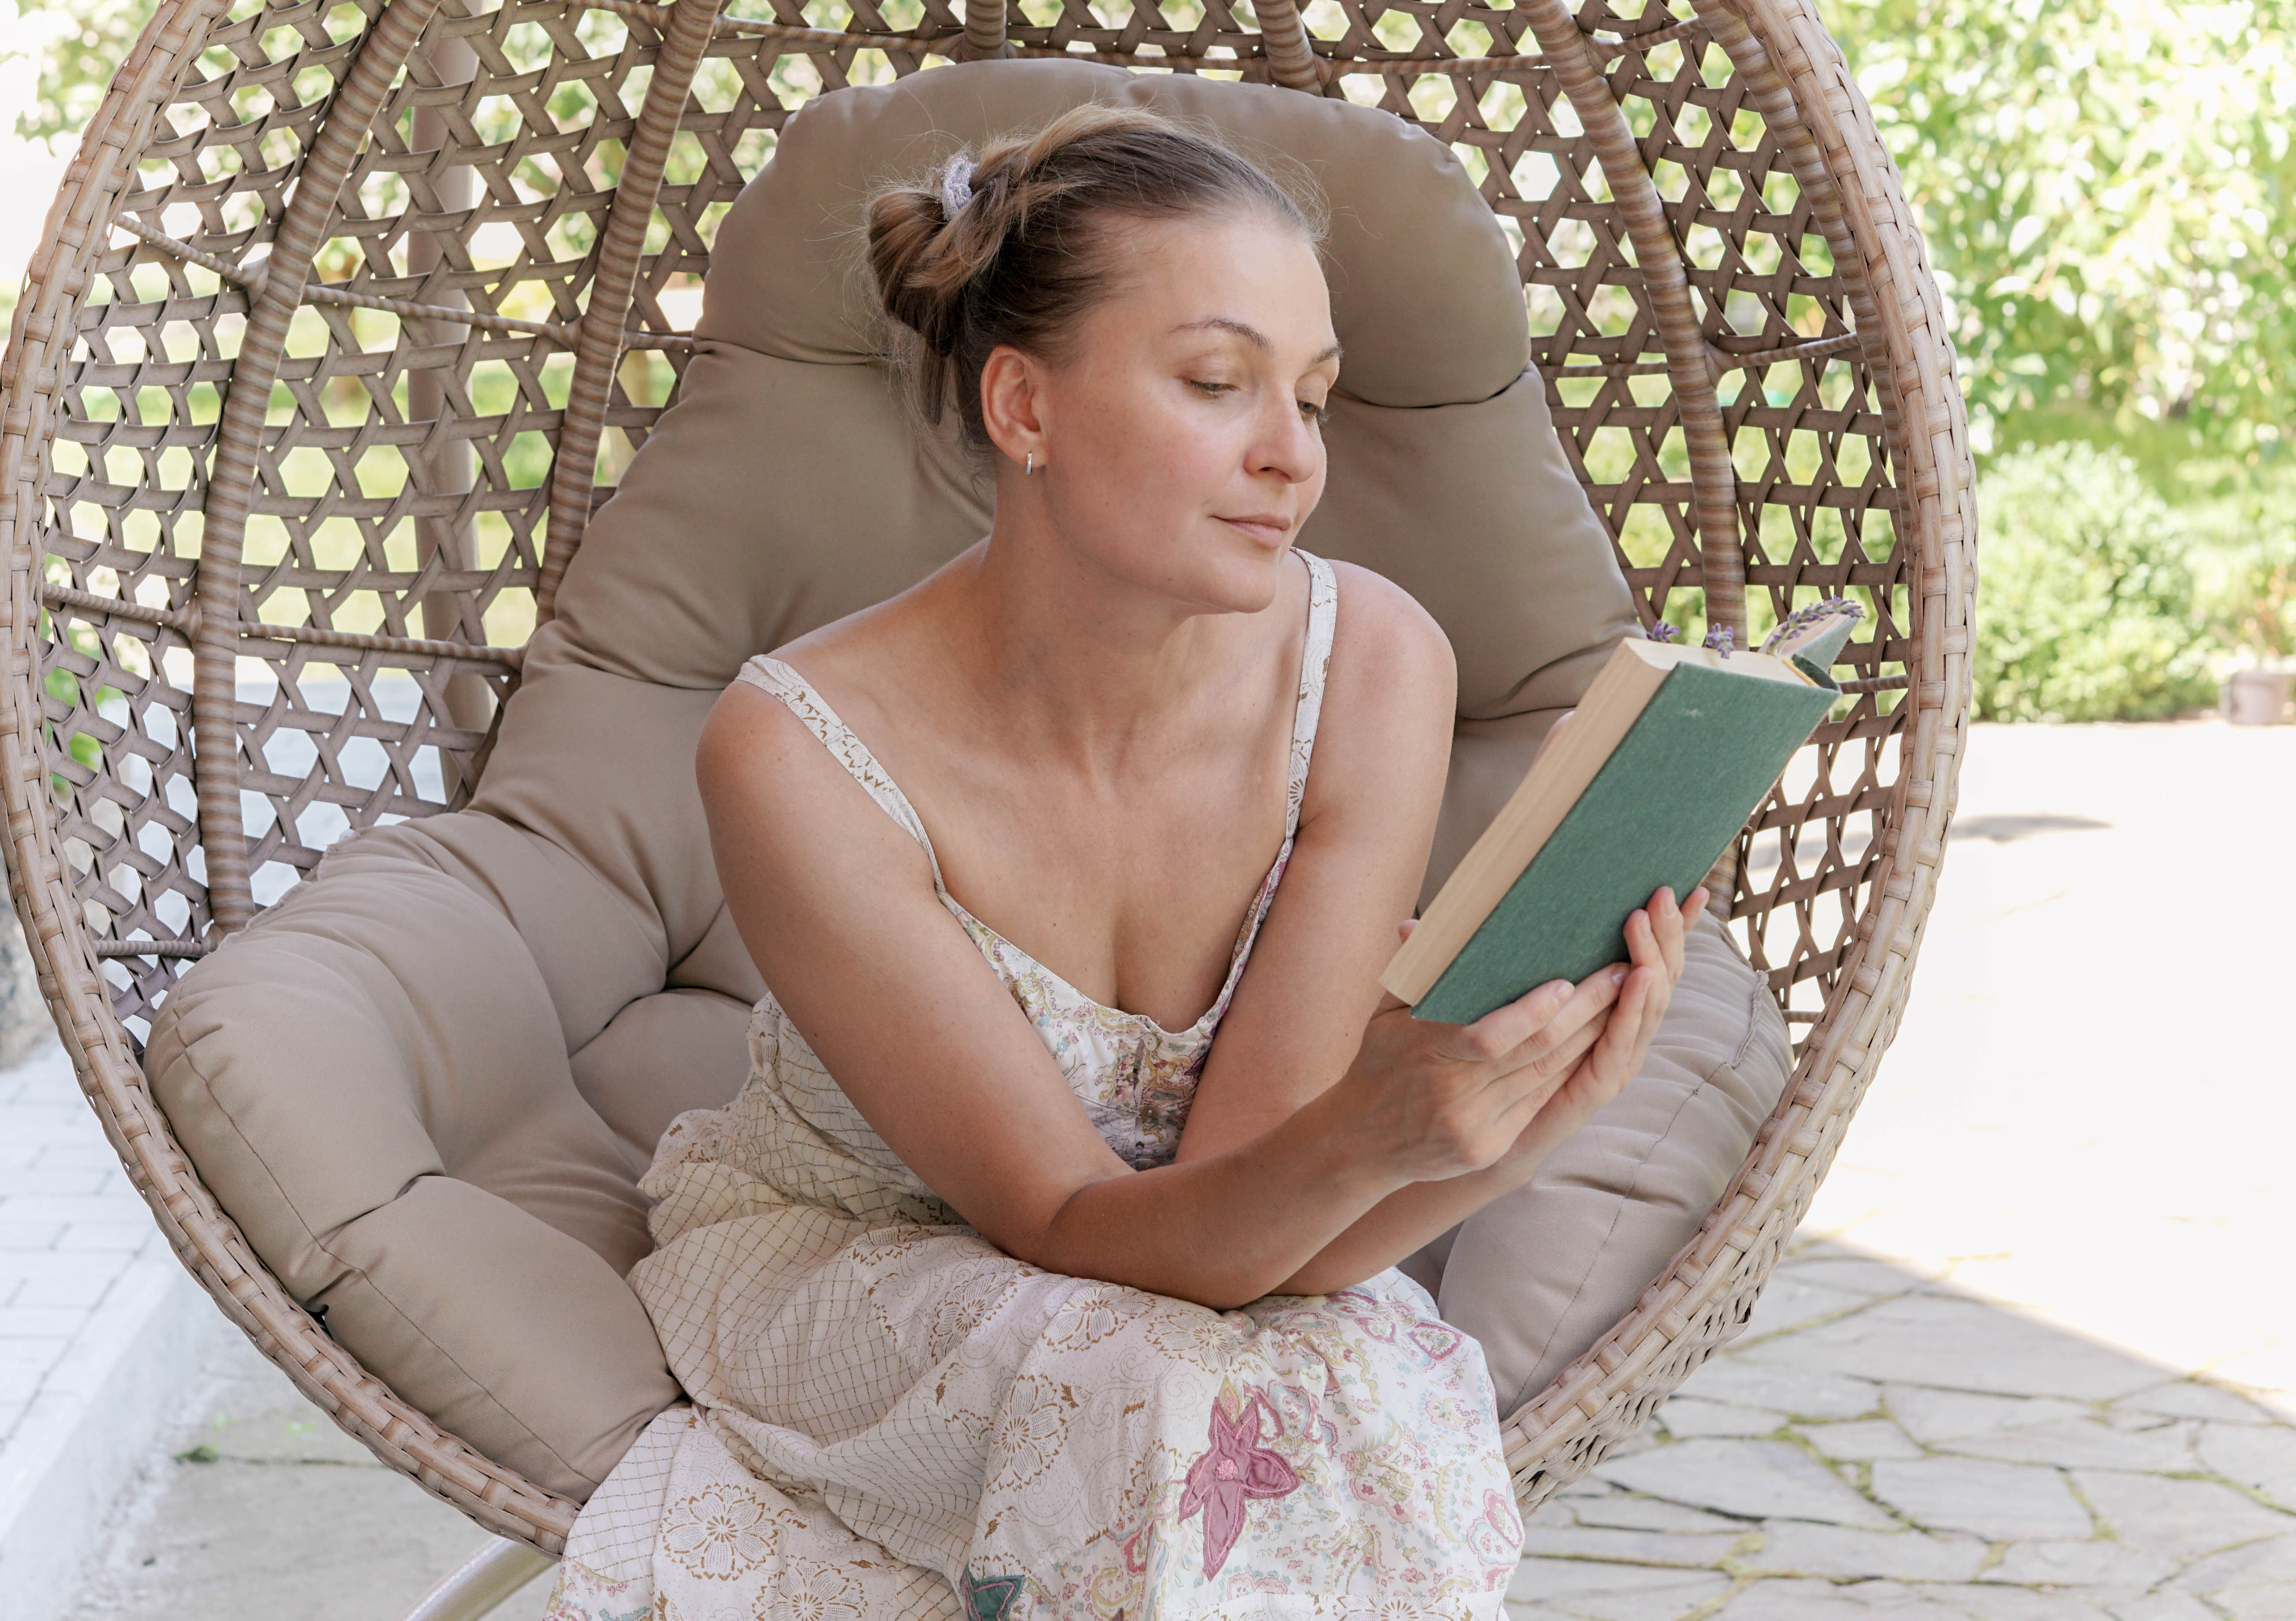 A woman sitting in a chair cocoon and reading a book